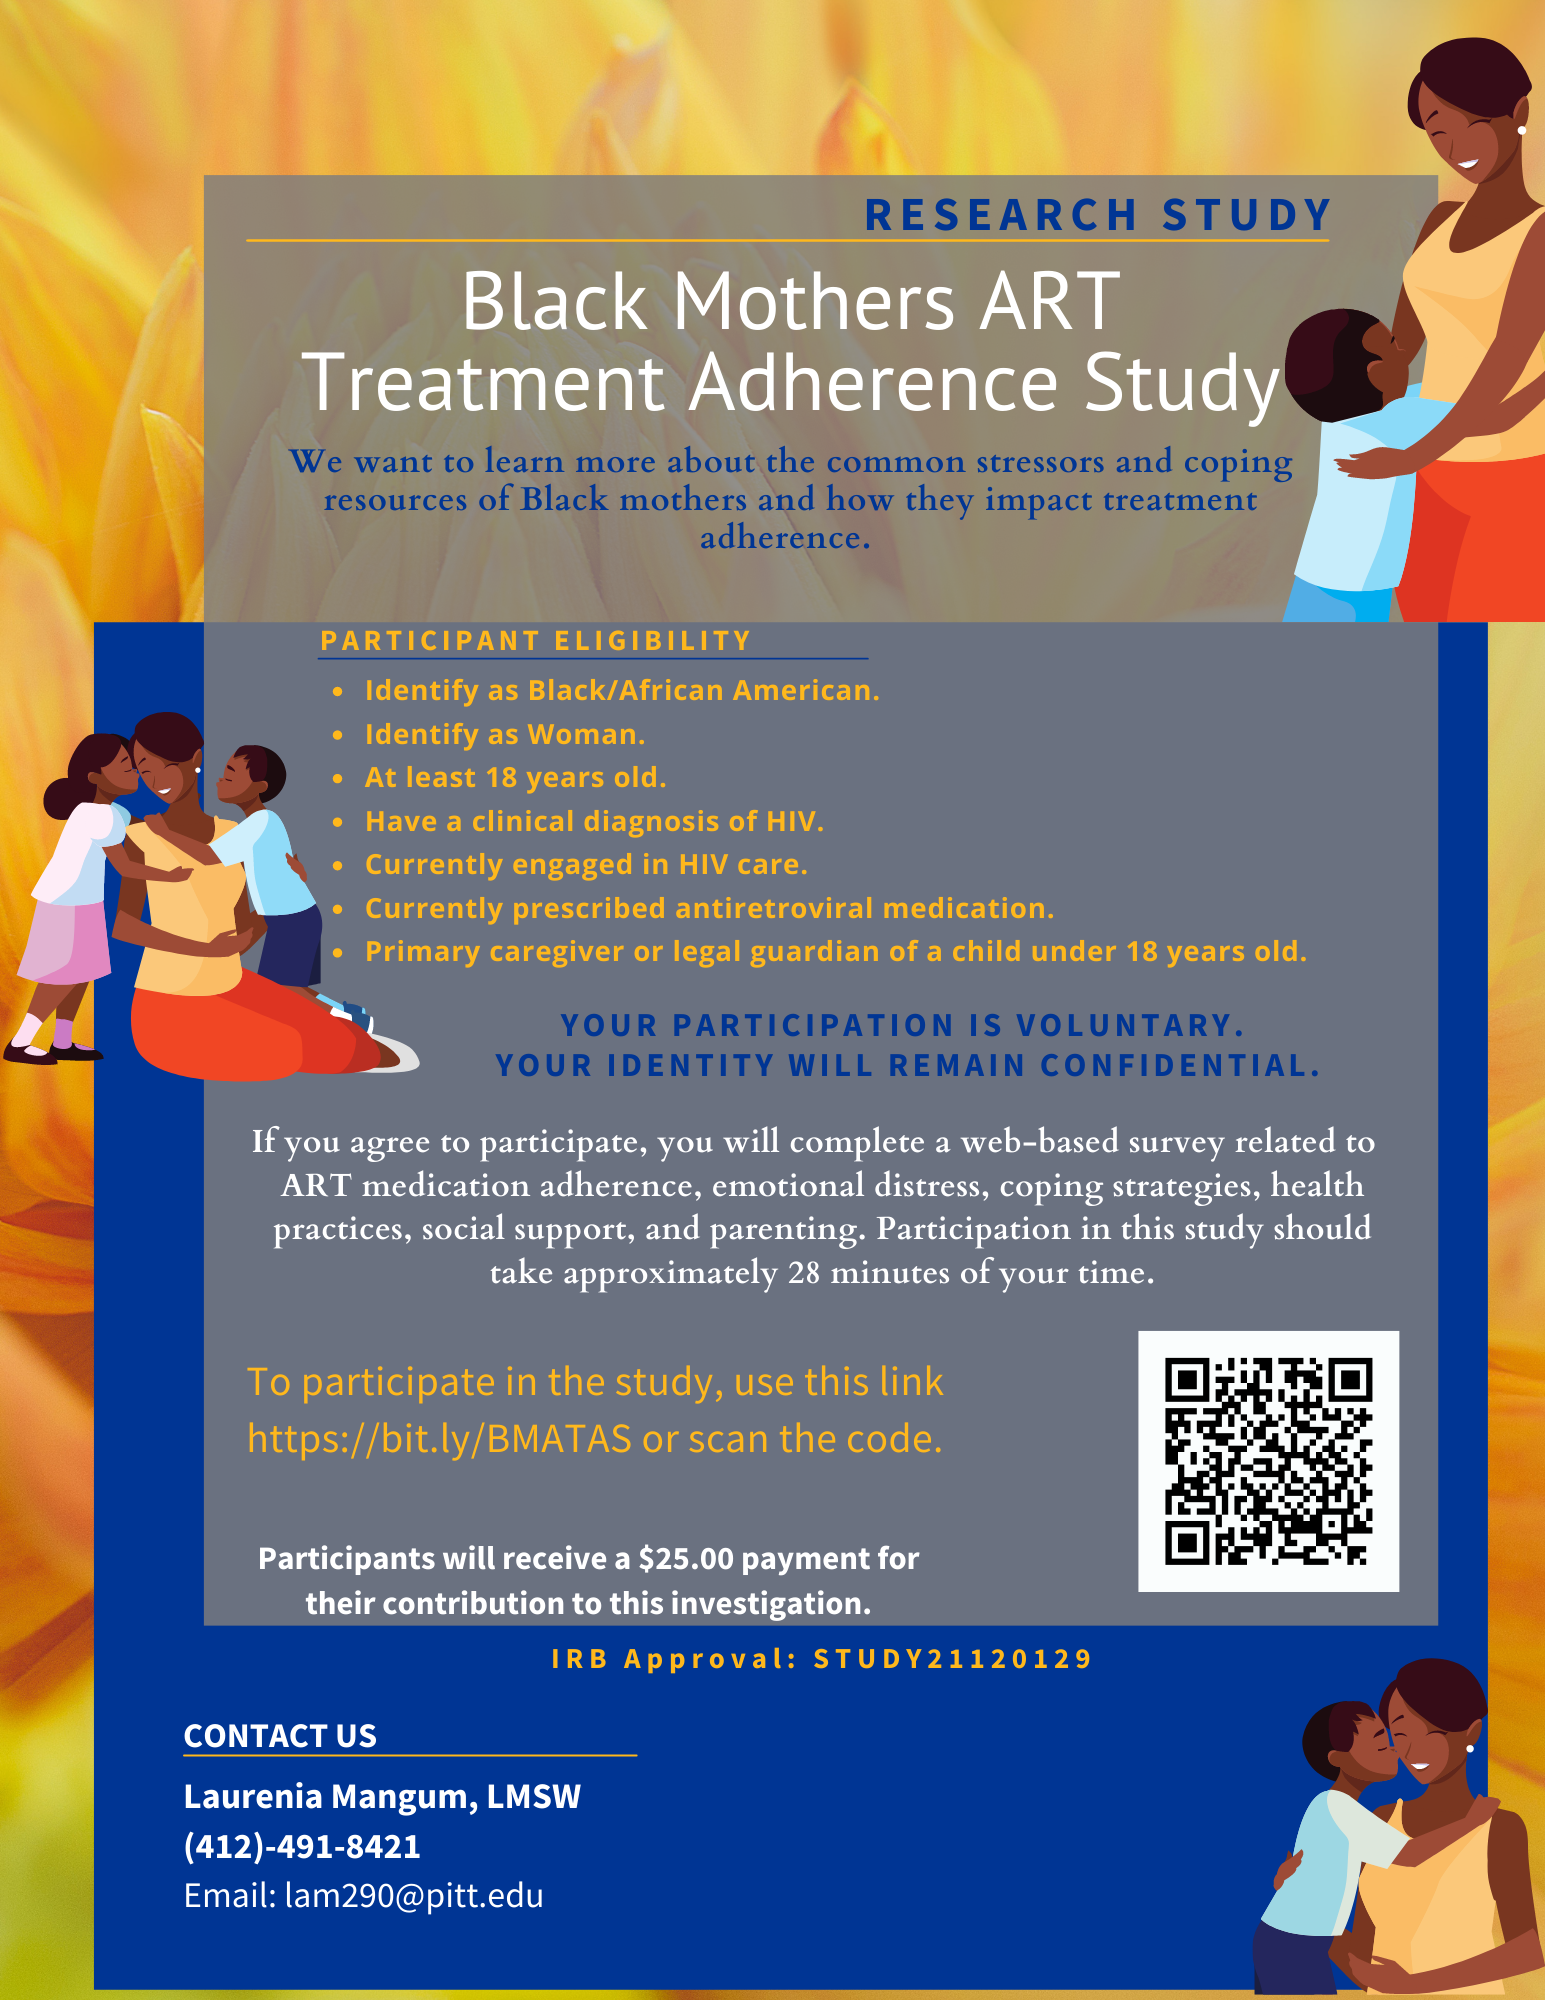 Flyer with survey details, linking to https://bit.ly/BMATAS, showing a Black woman hugging a child, a 2nd Black woman with two children, and a 3rd Black woman with a child.